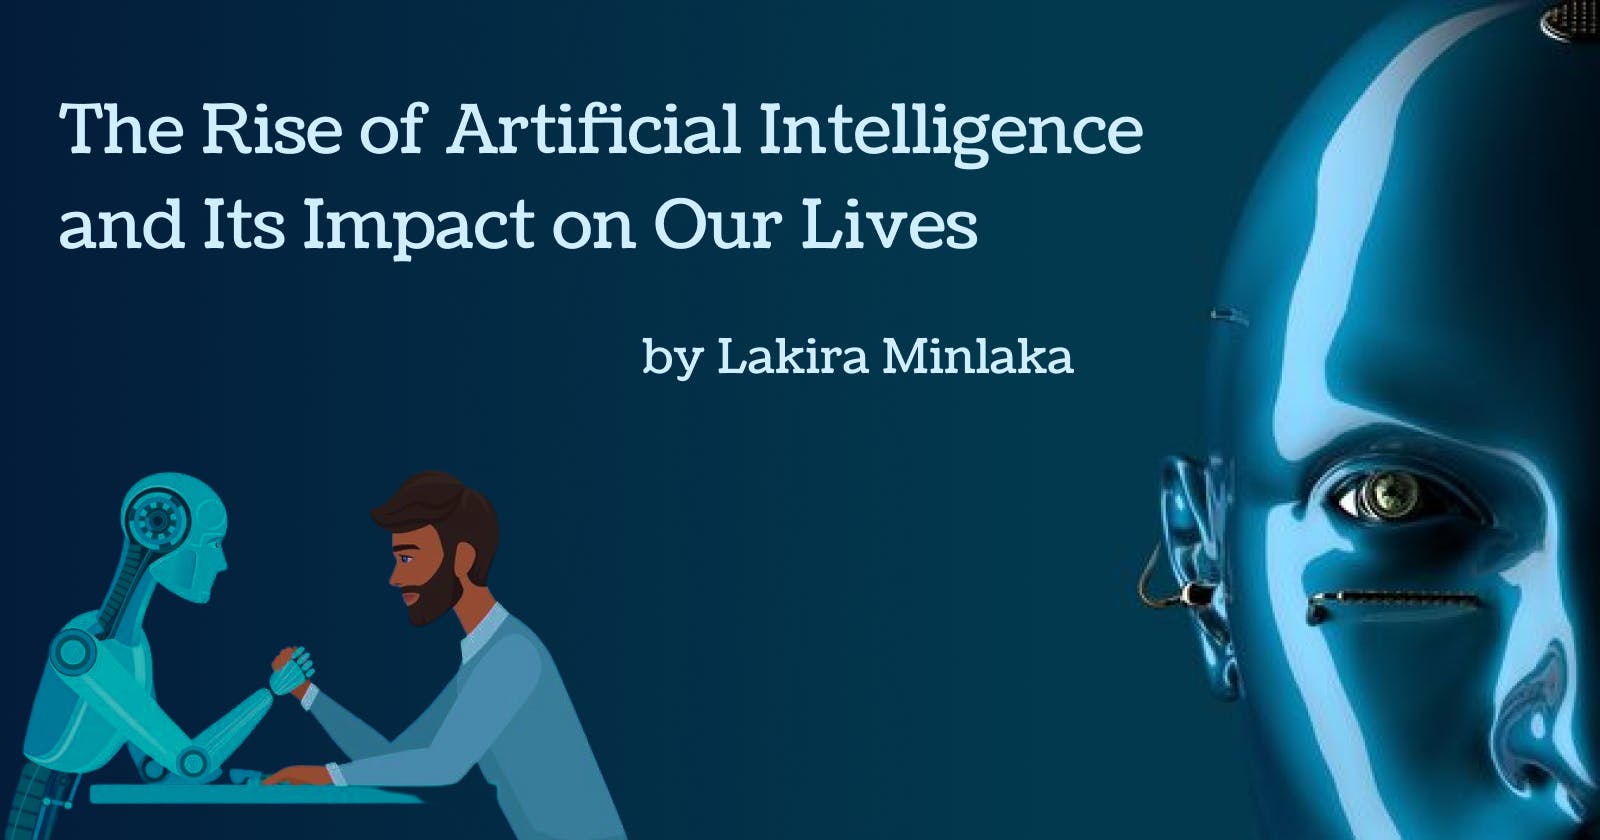 The Rise of Artificial Intelligence and Its Impact on Our Lives